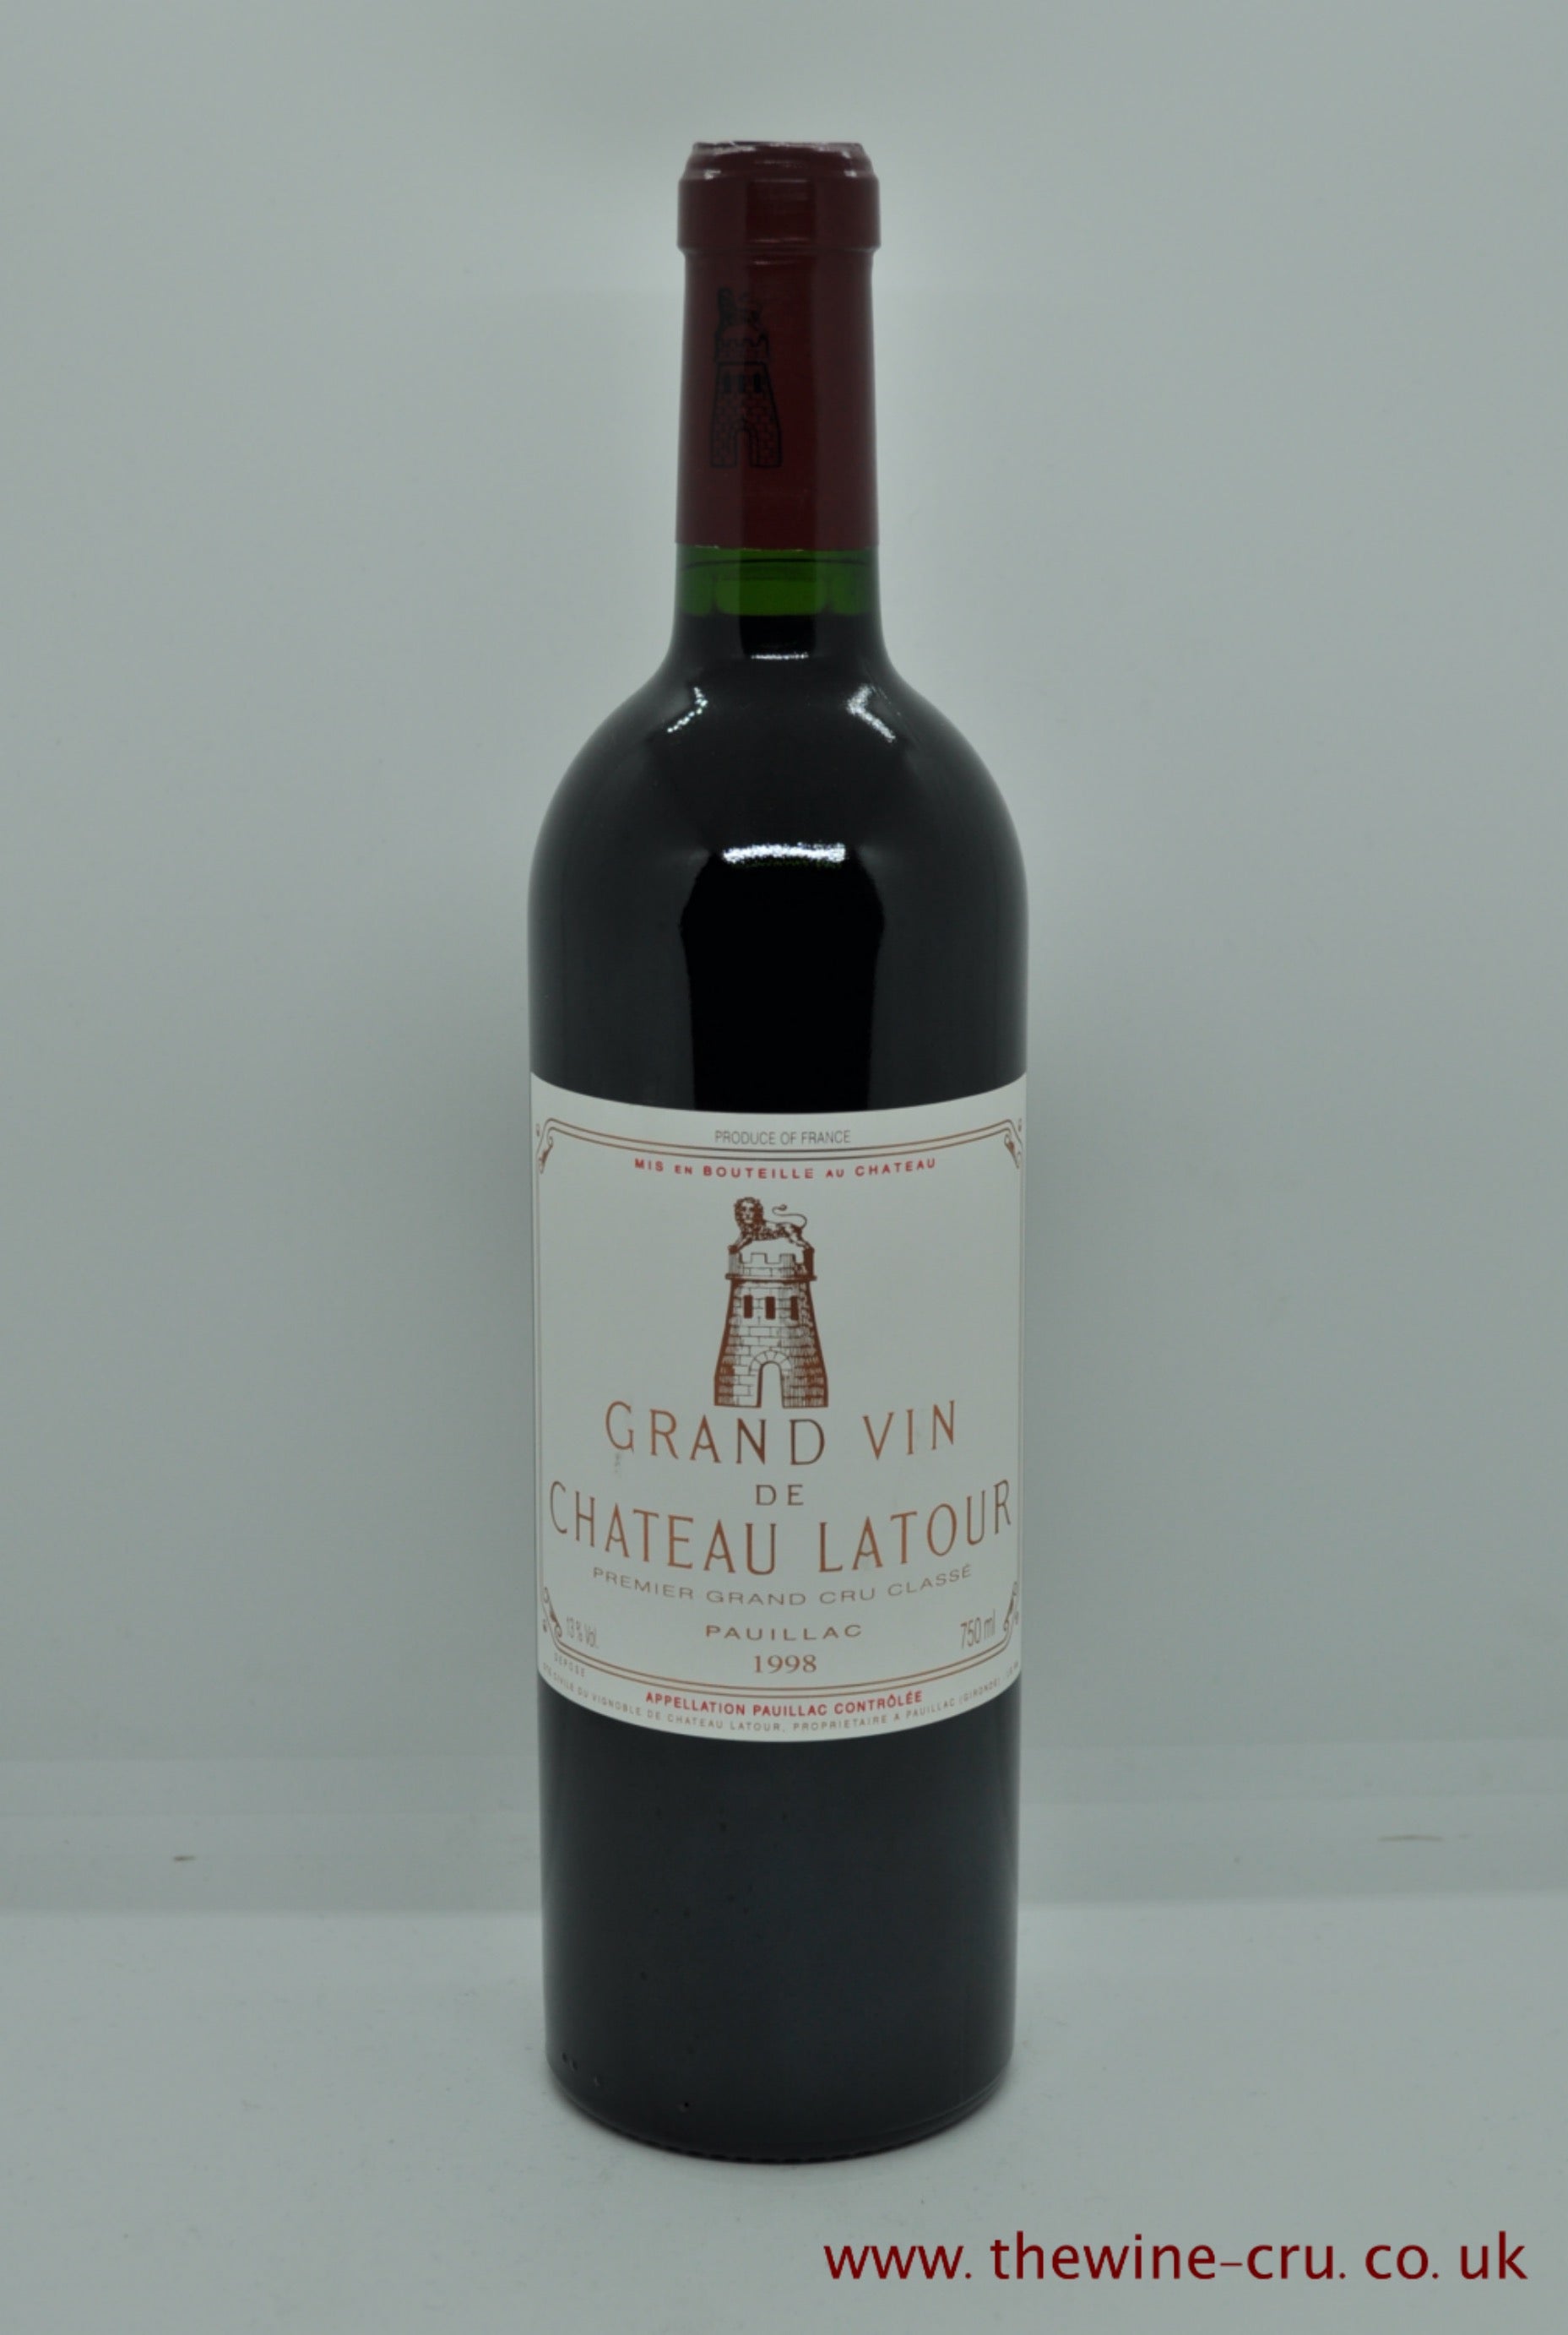 A bottle od 1998 vintage red wine. Chateau Latour, France, Bordeaux. The bottle is in excellent condition. Immediate delivery. free local delivery. Gift wrapping available.